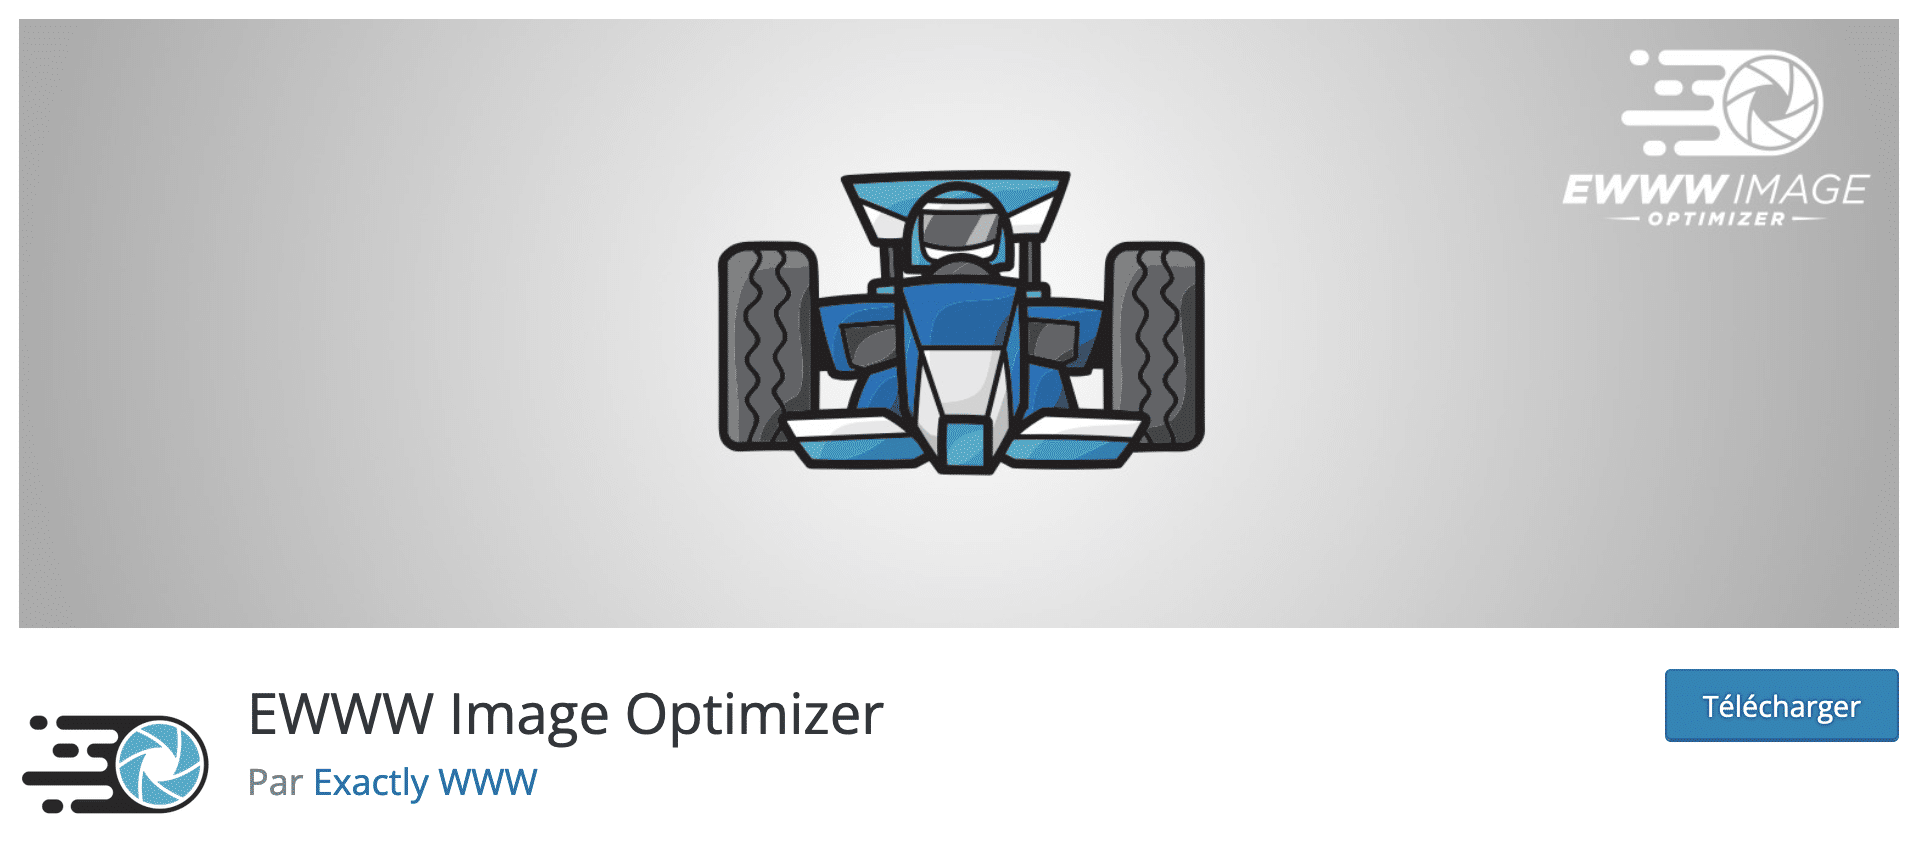 EWWW Image Optimizer is a WordPress extension to reduce the weight of your photos.